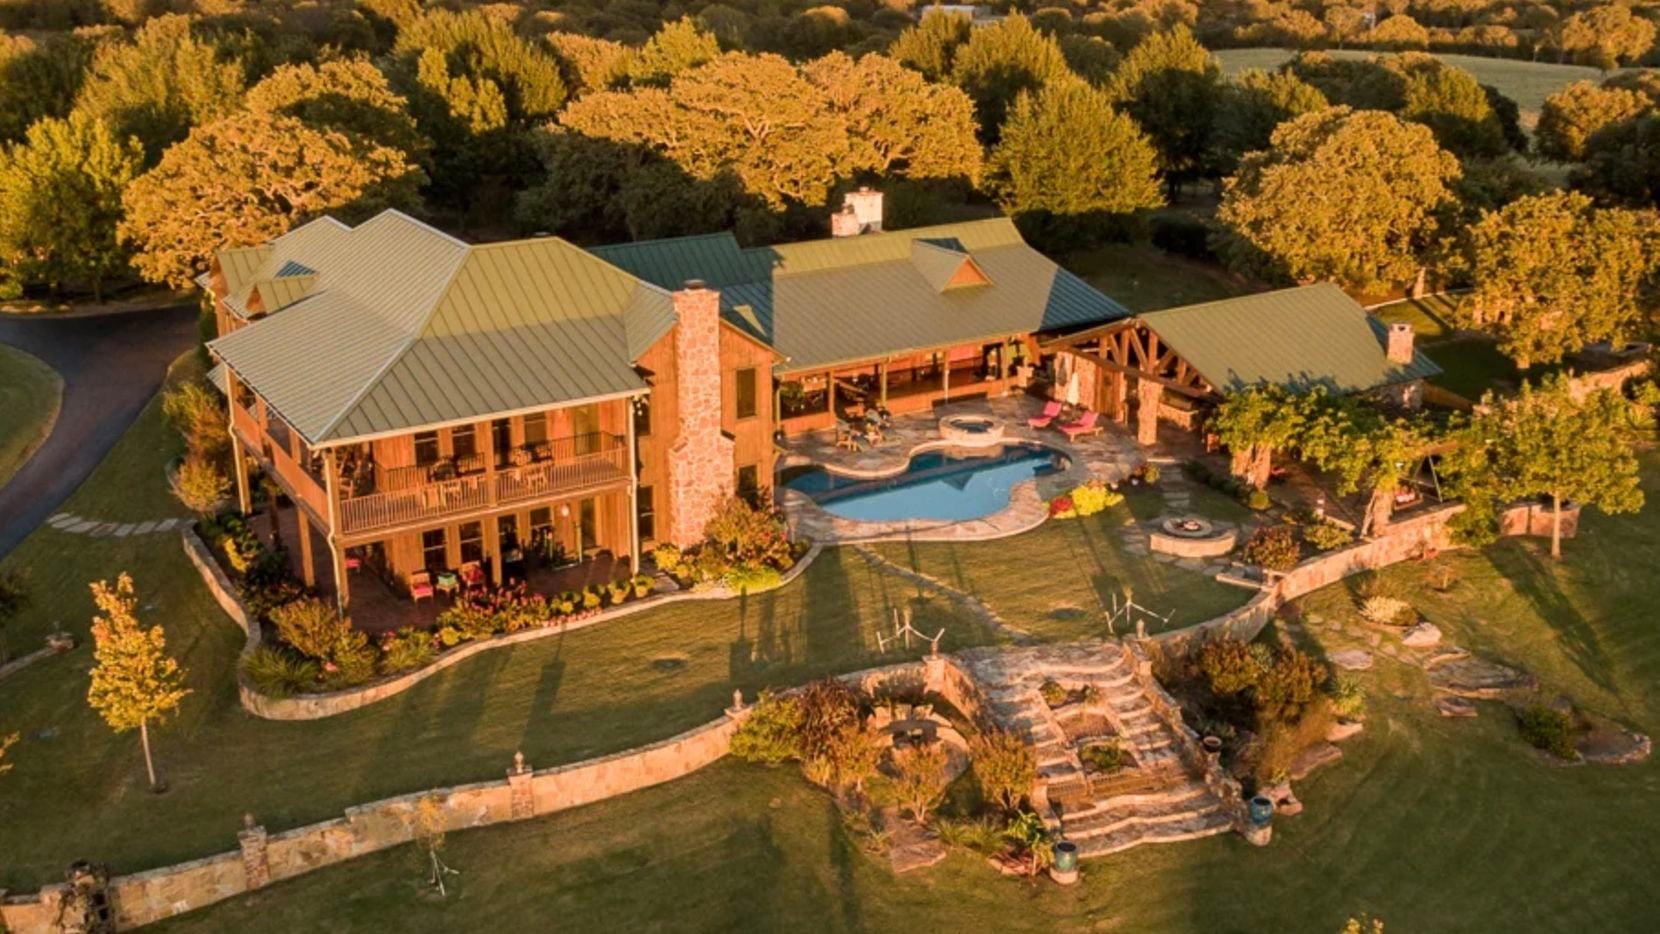 Terry Bradshaw's ranch in southern Oklahoma includes a large main house.